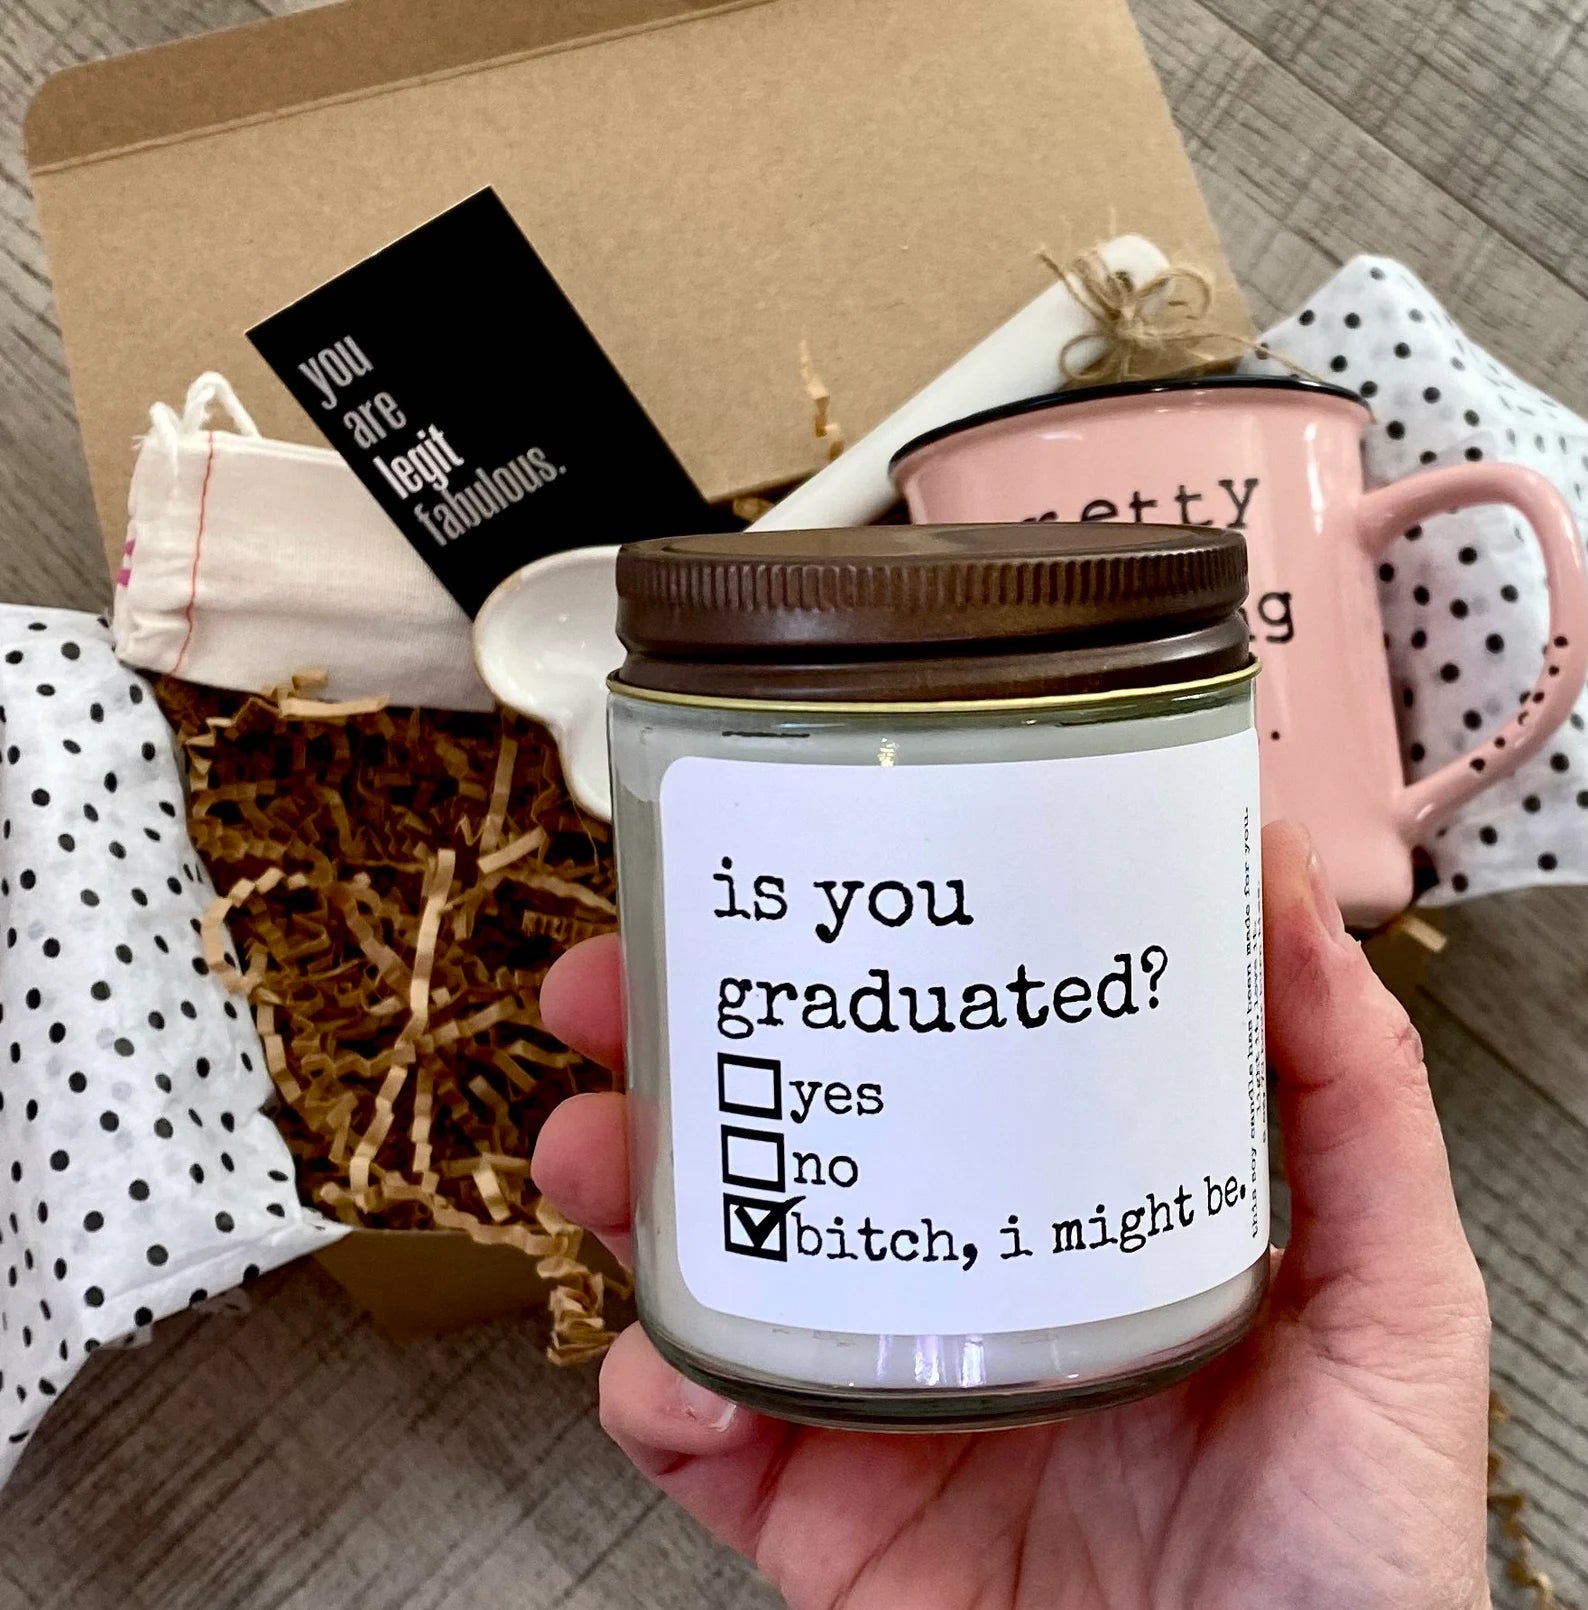 Graduation gift with mug and candle, congratulations gift, college graduation, grad gift, personalized gift, graduation box, class of 2023, care package